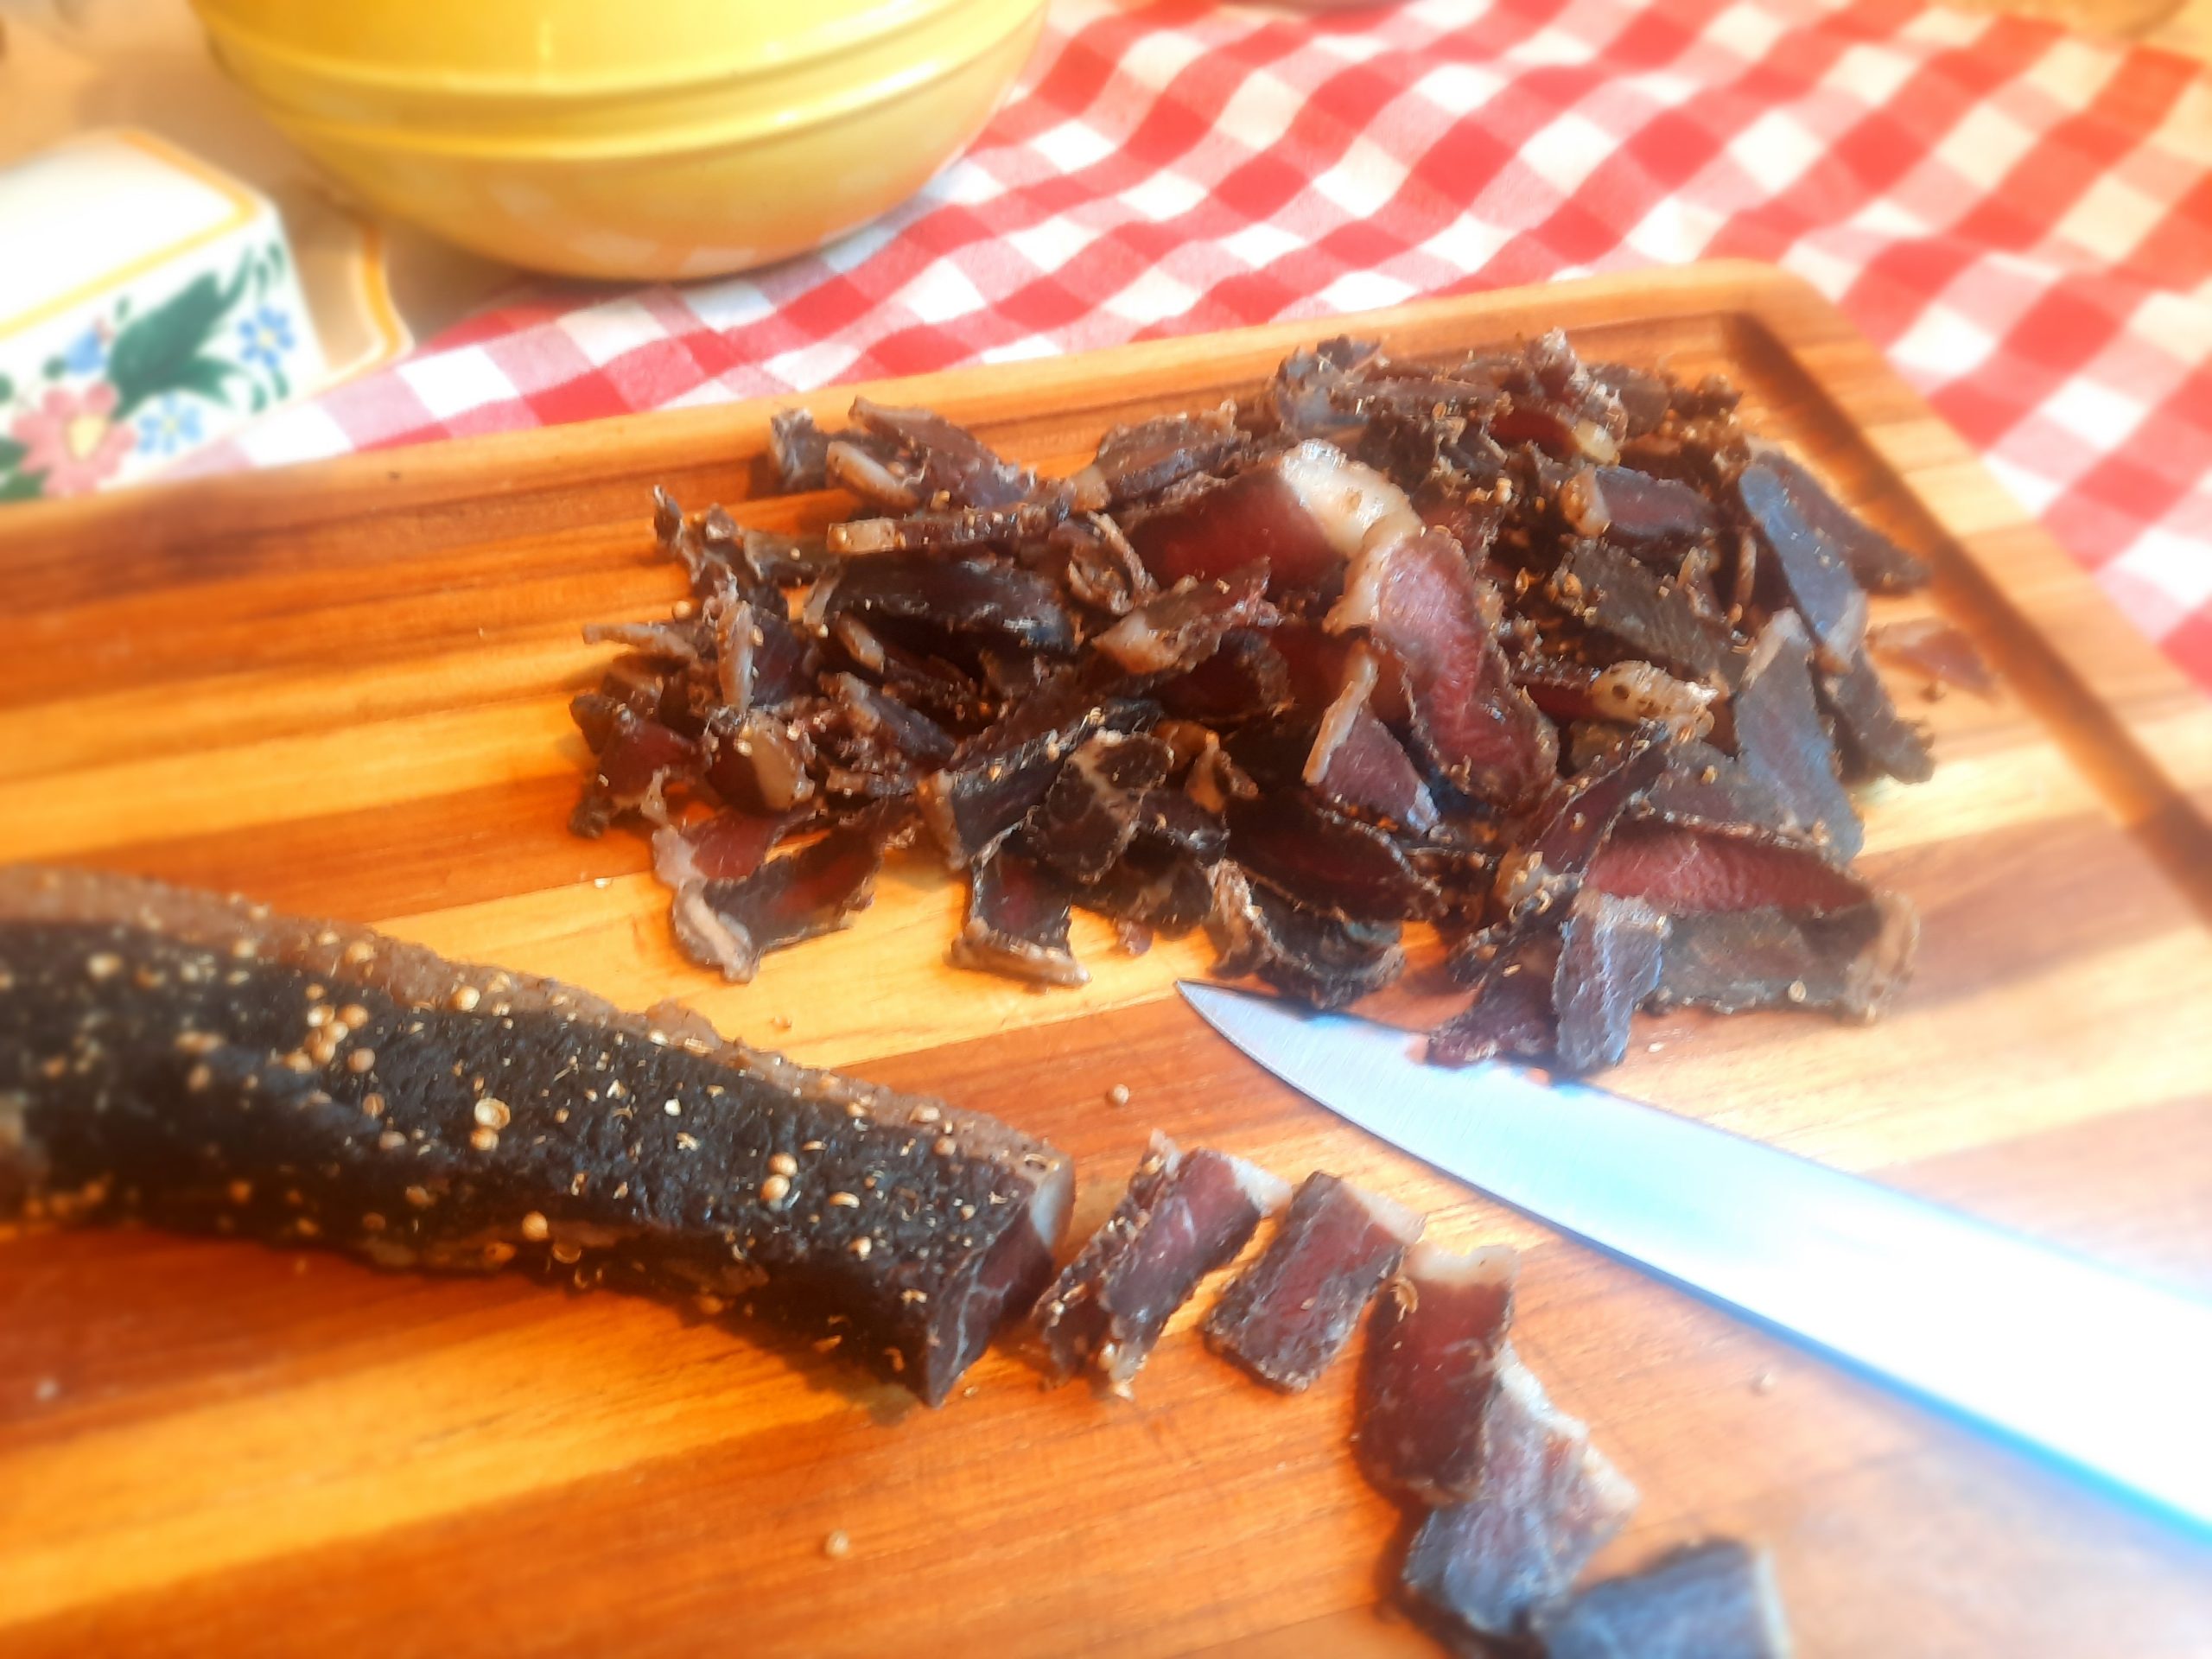 Biltong cured meat is a South African delicacy